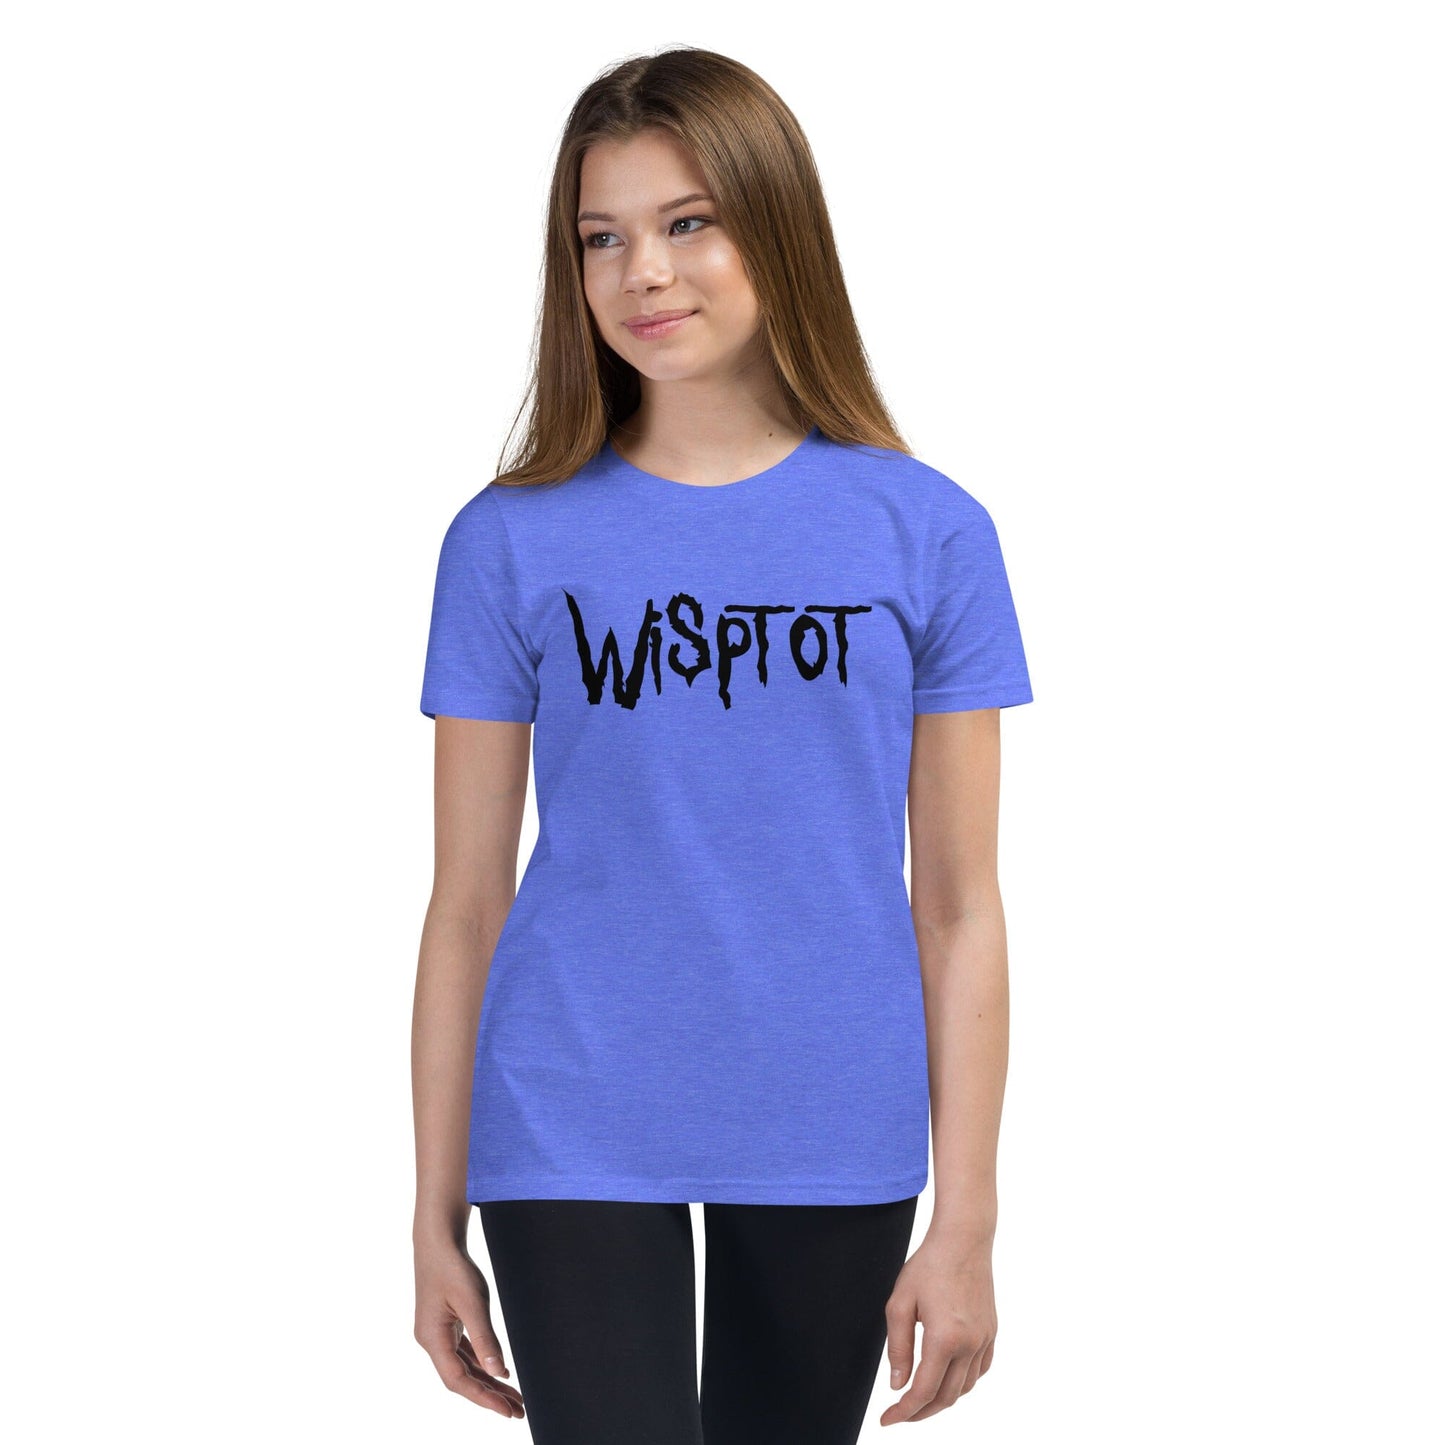 WispTot YOUTH T-Shirt [Unfoiled] (All net proceeds go to equally to Kitty CrusAIDe and Rags to Riches Animal Rescue) JoyousJoyfulJoyness Heather Columbia Blue S 